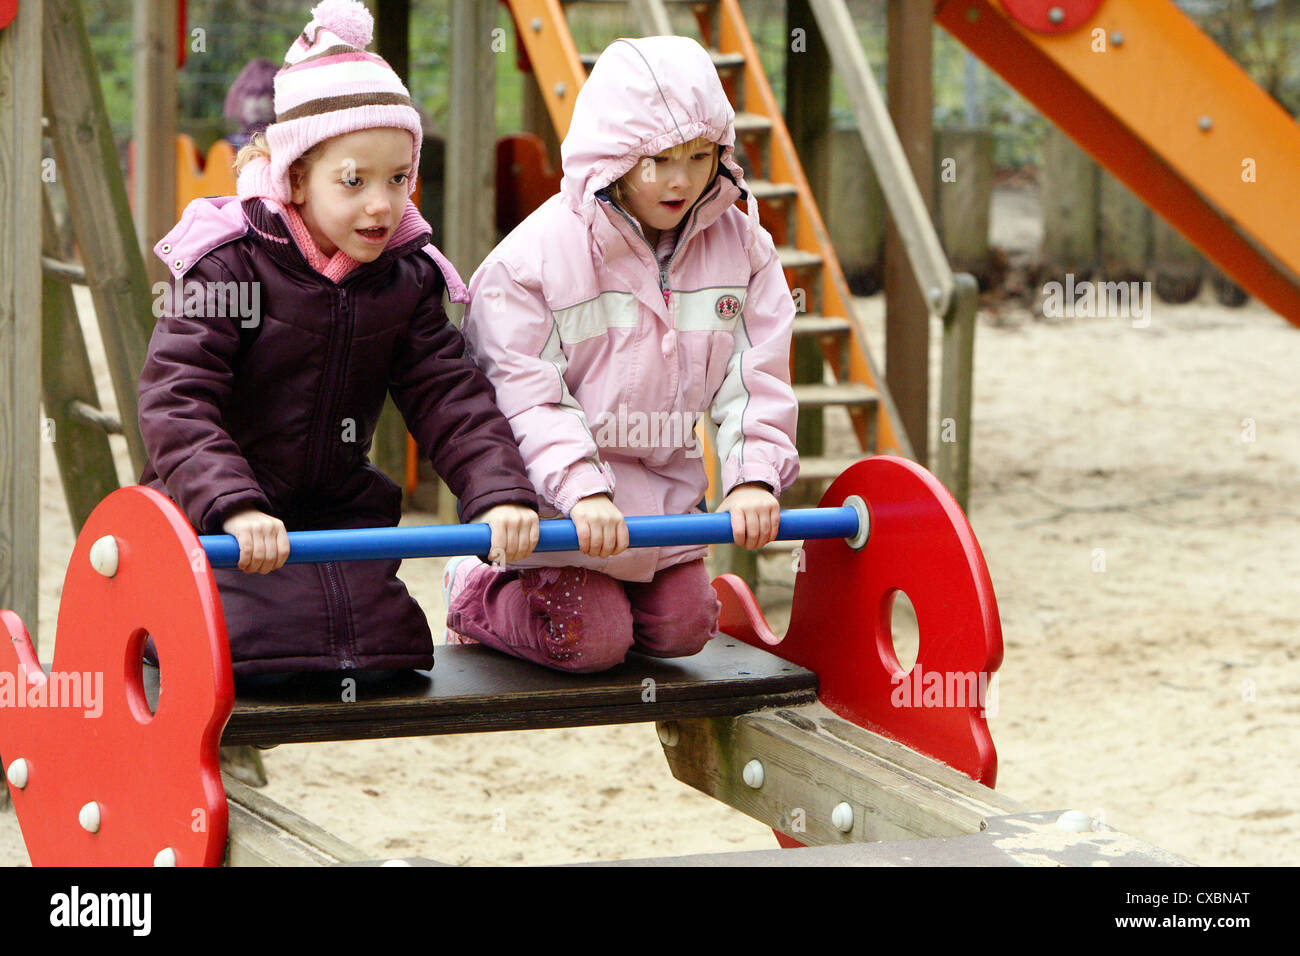 Berlin, girls bounce up a child on a playground seesaw Stock Photo